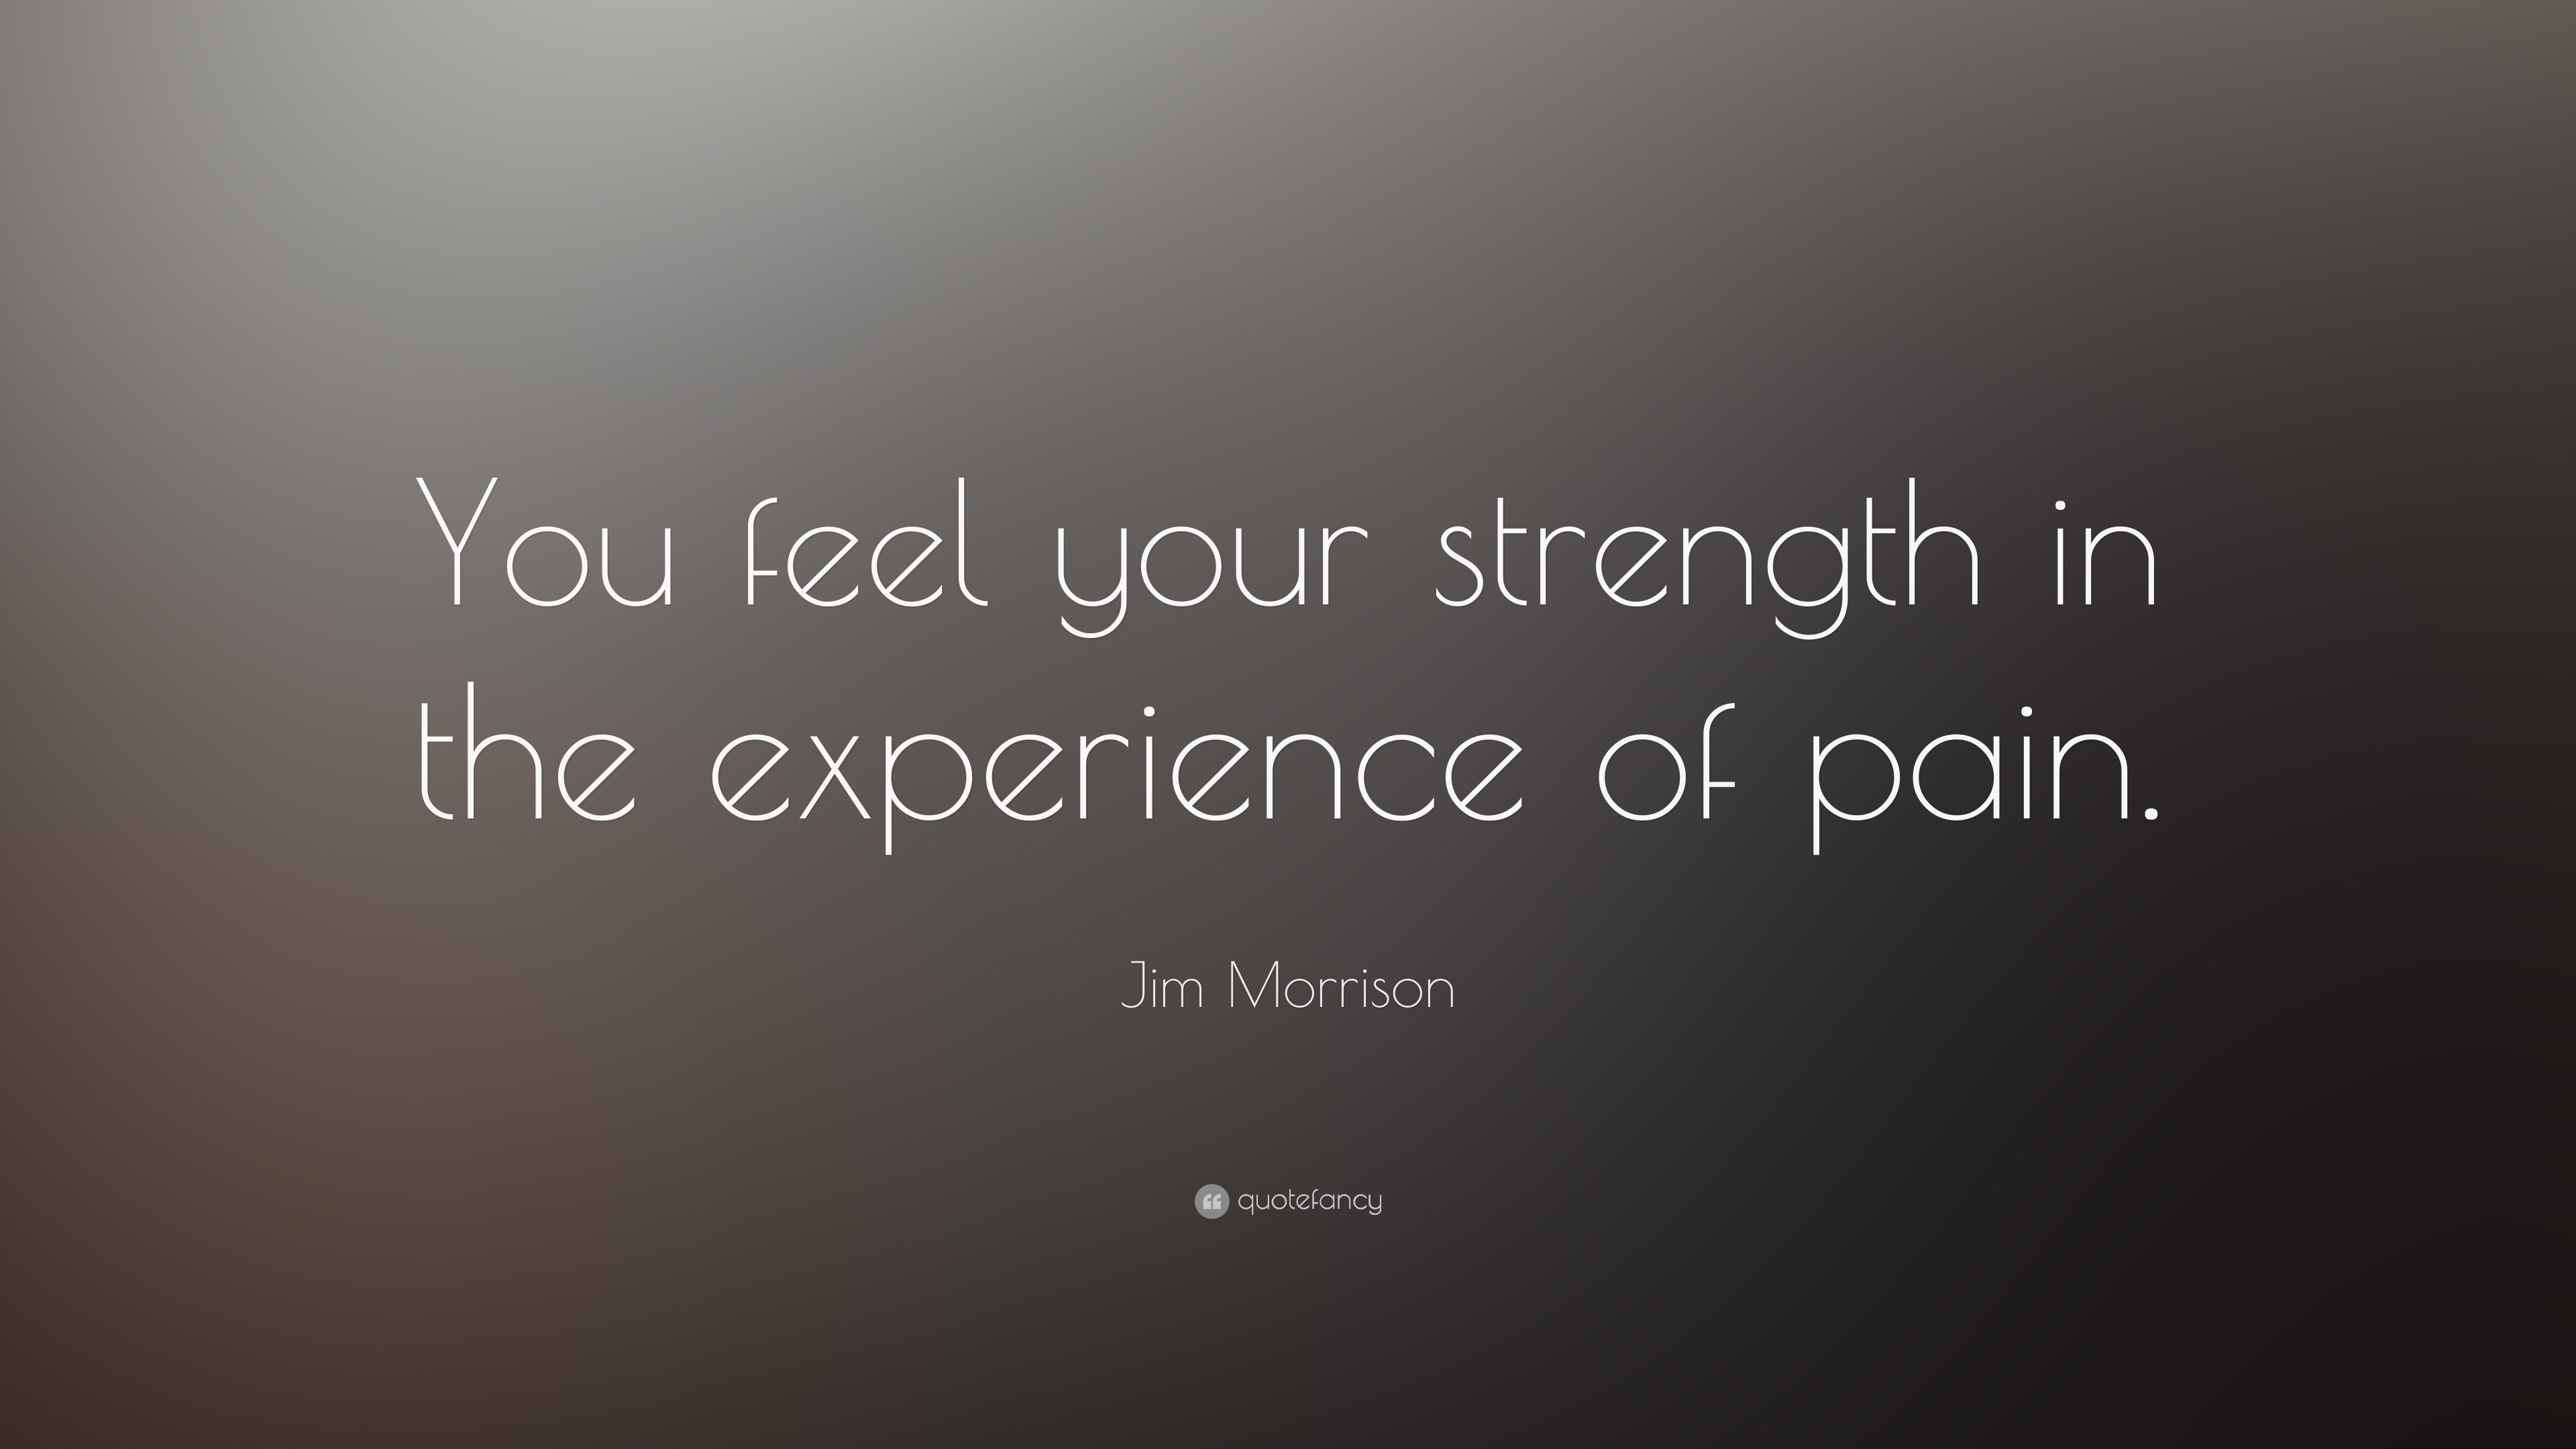 Quotes About Pain And Strength - popularquotesimg